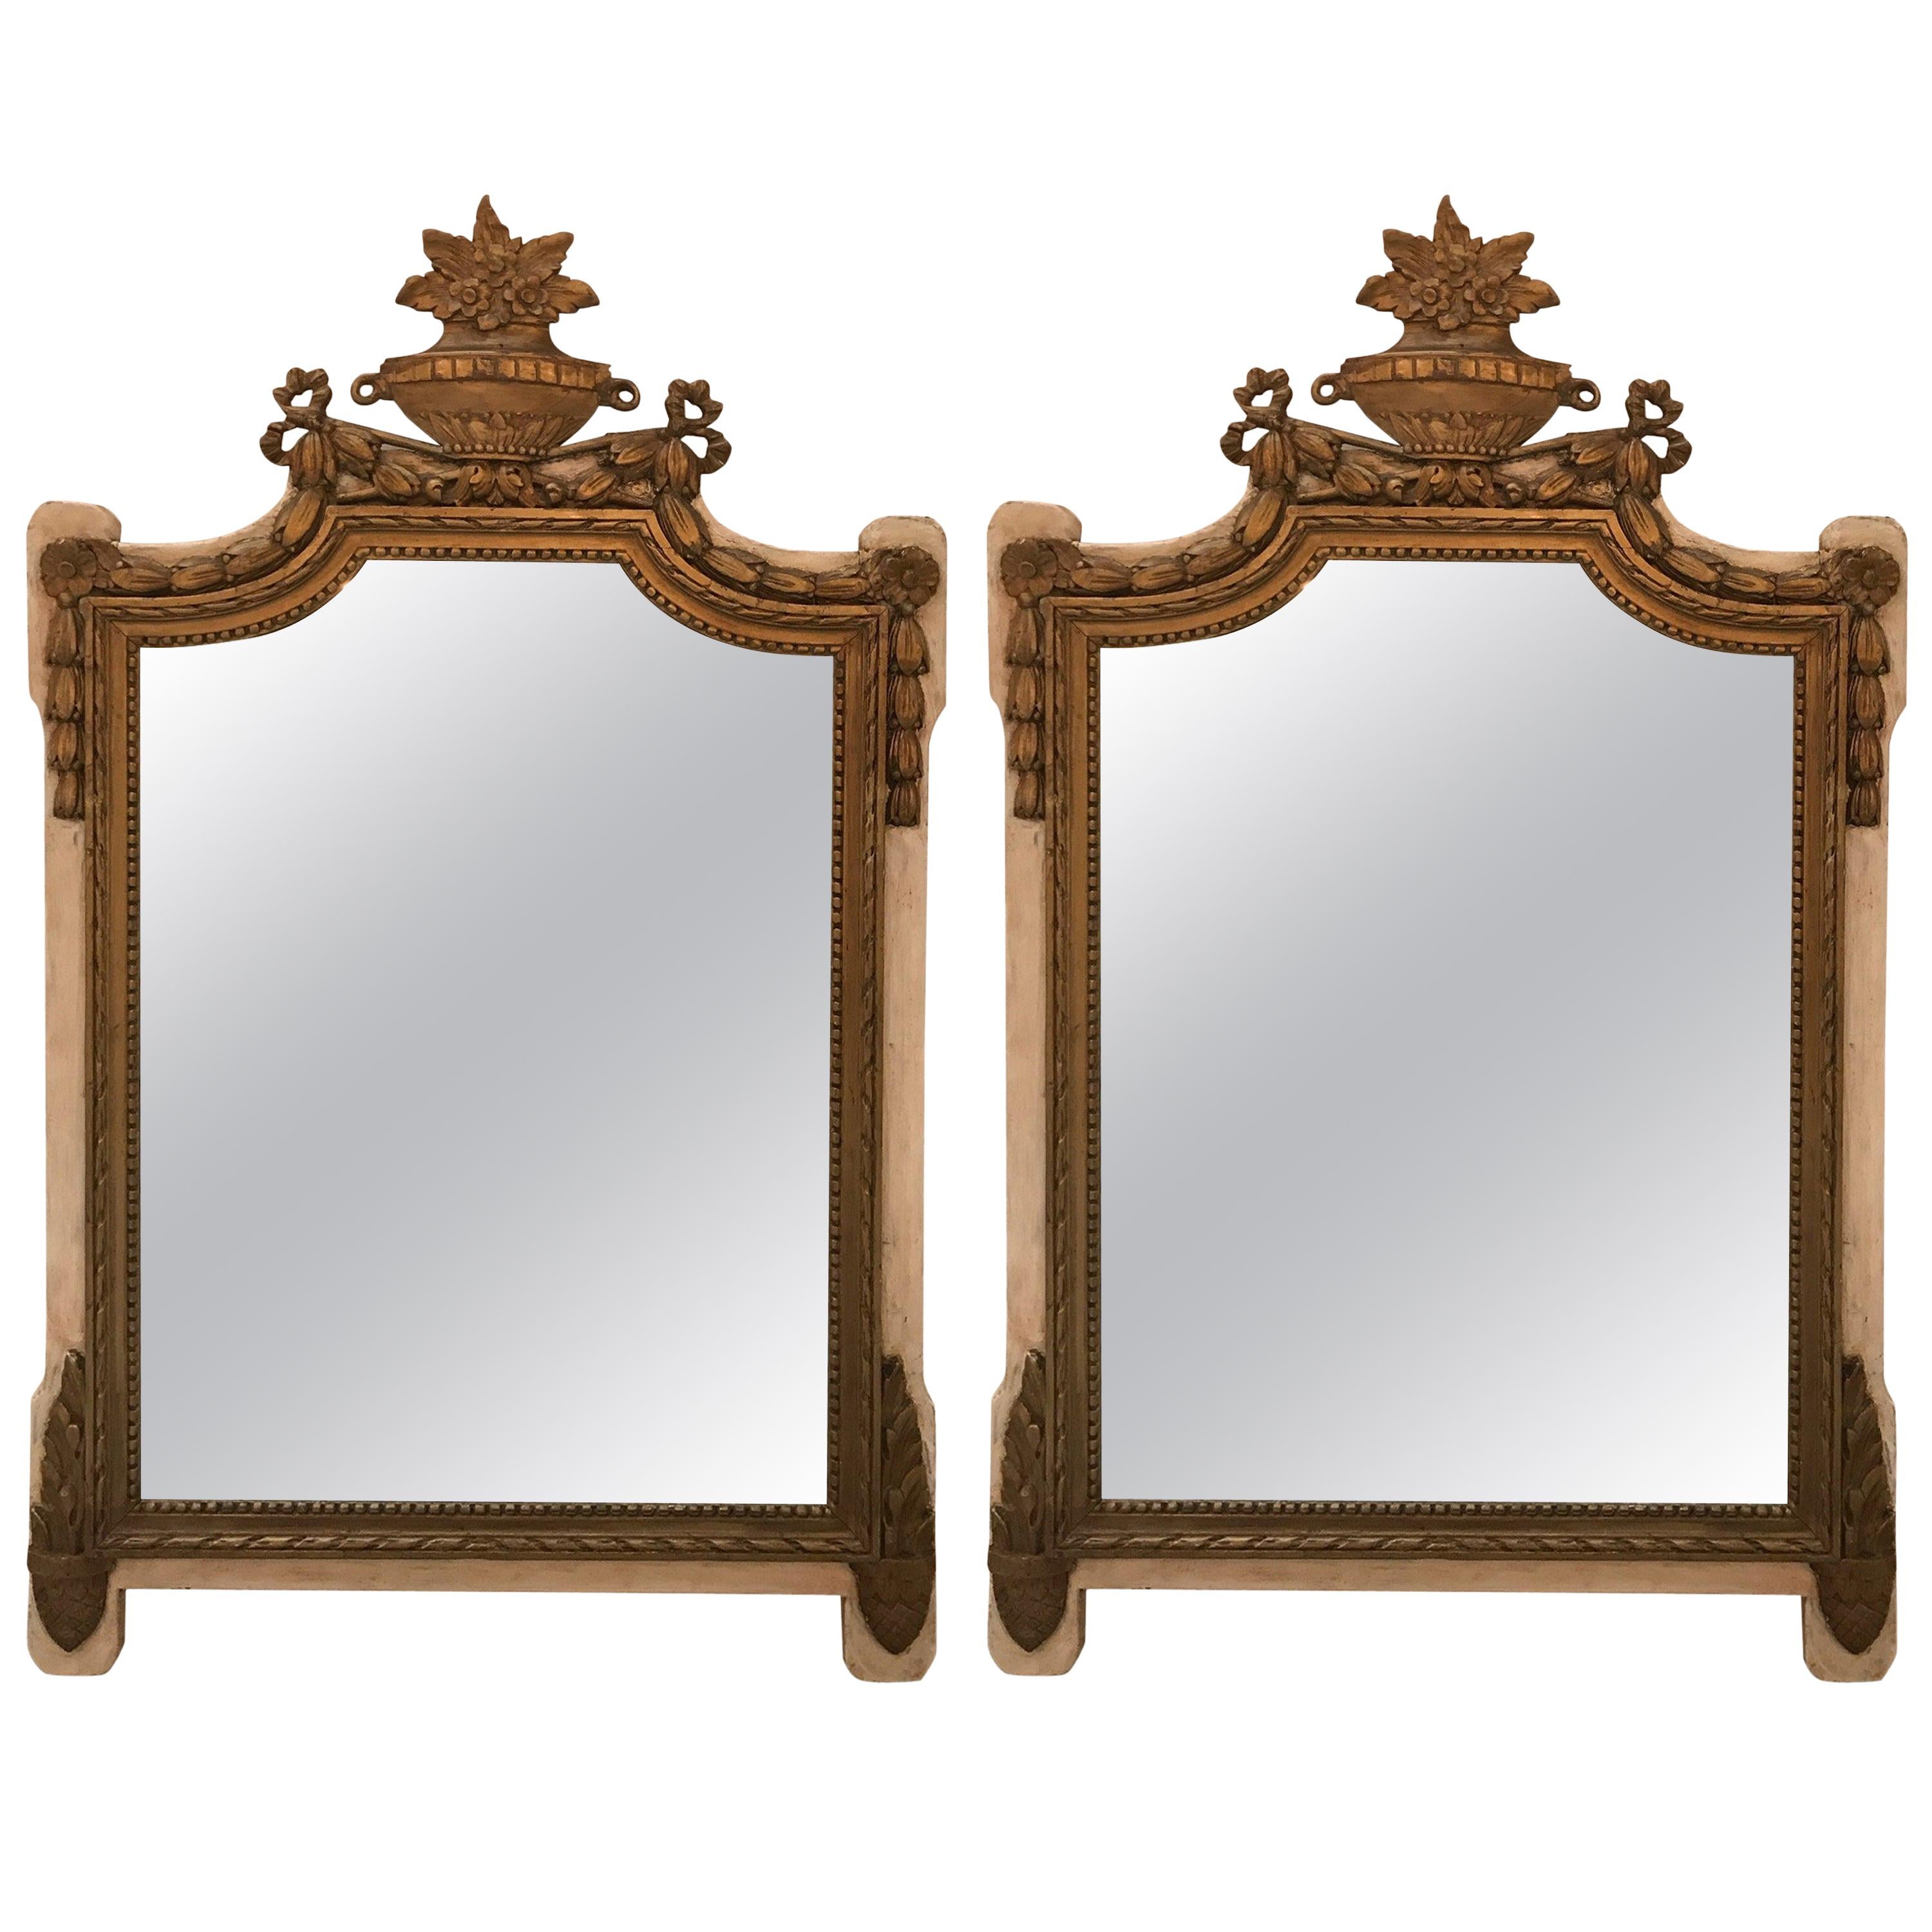 Pair of Antique 19th Century French Parcel-Gilt Mirrors